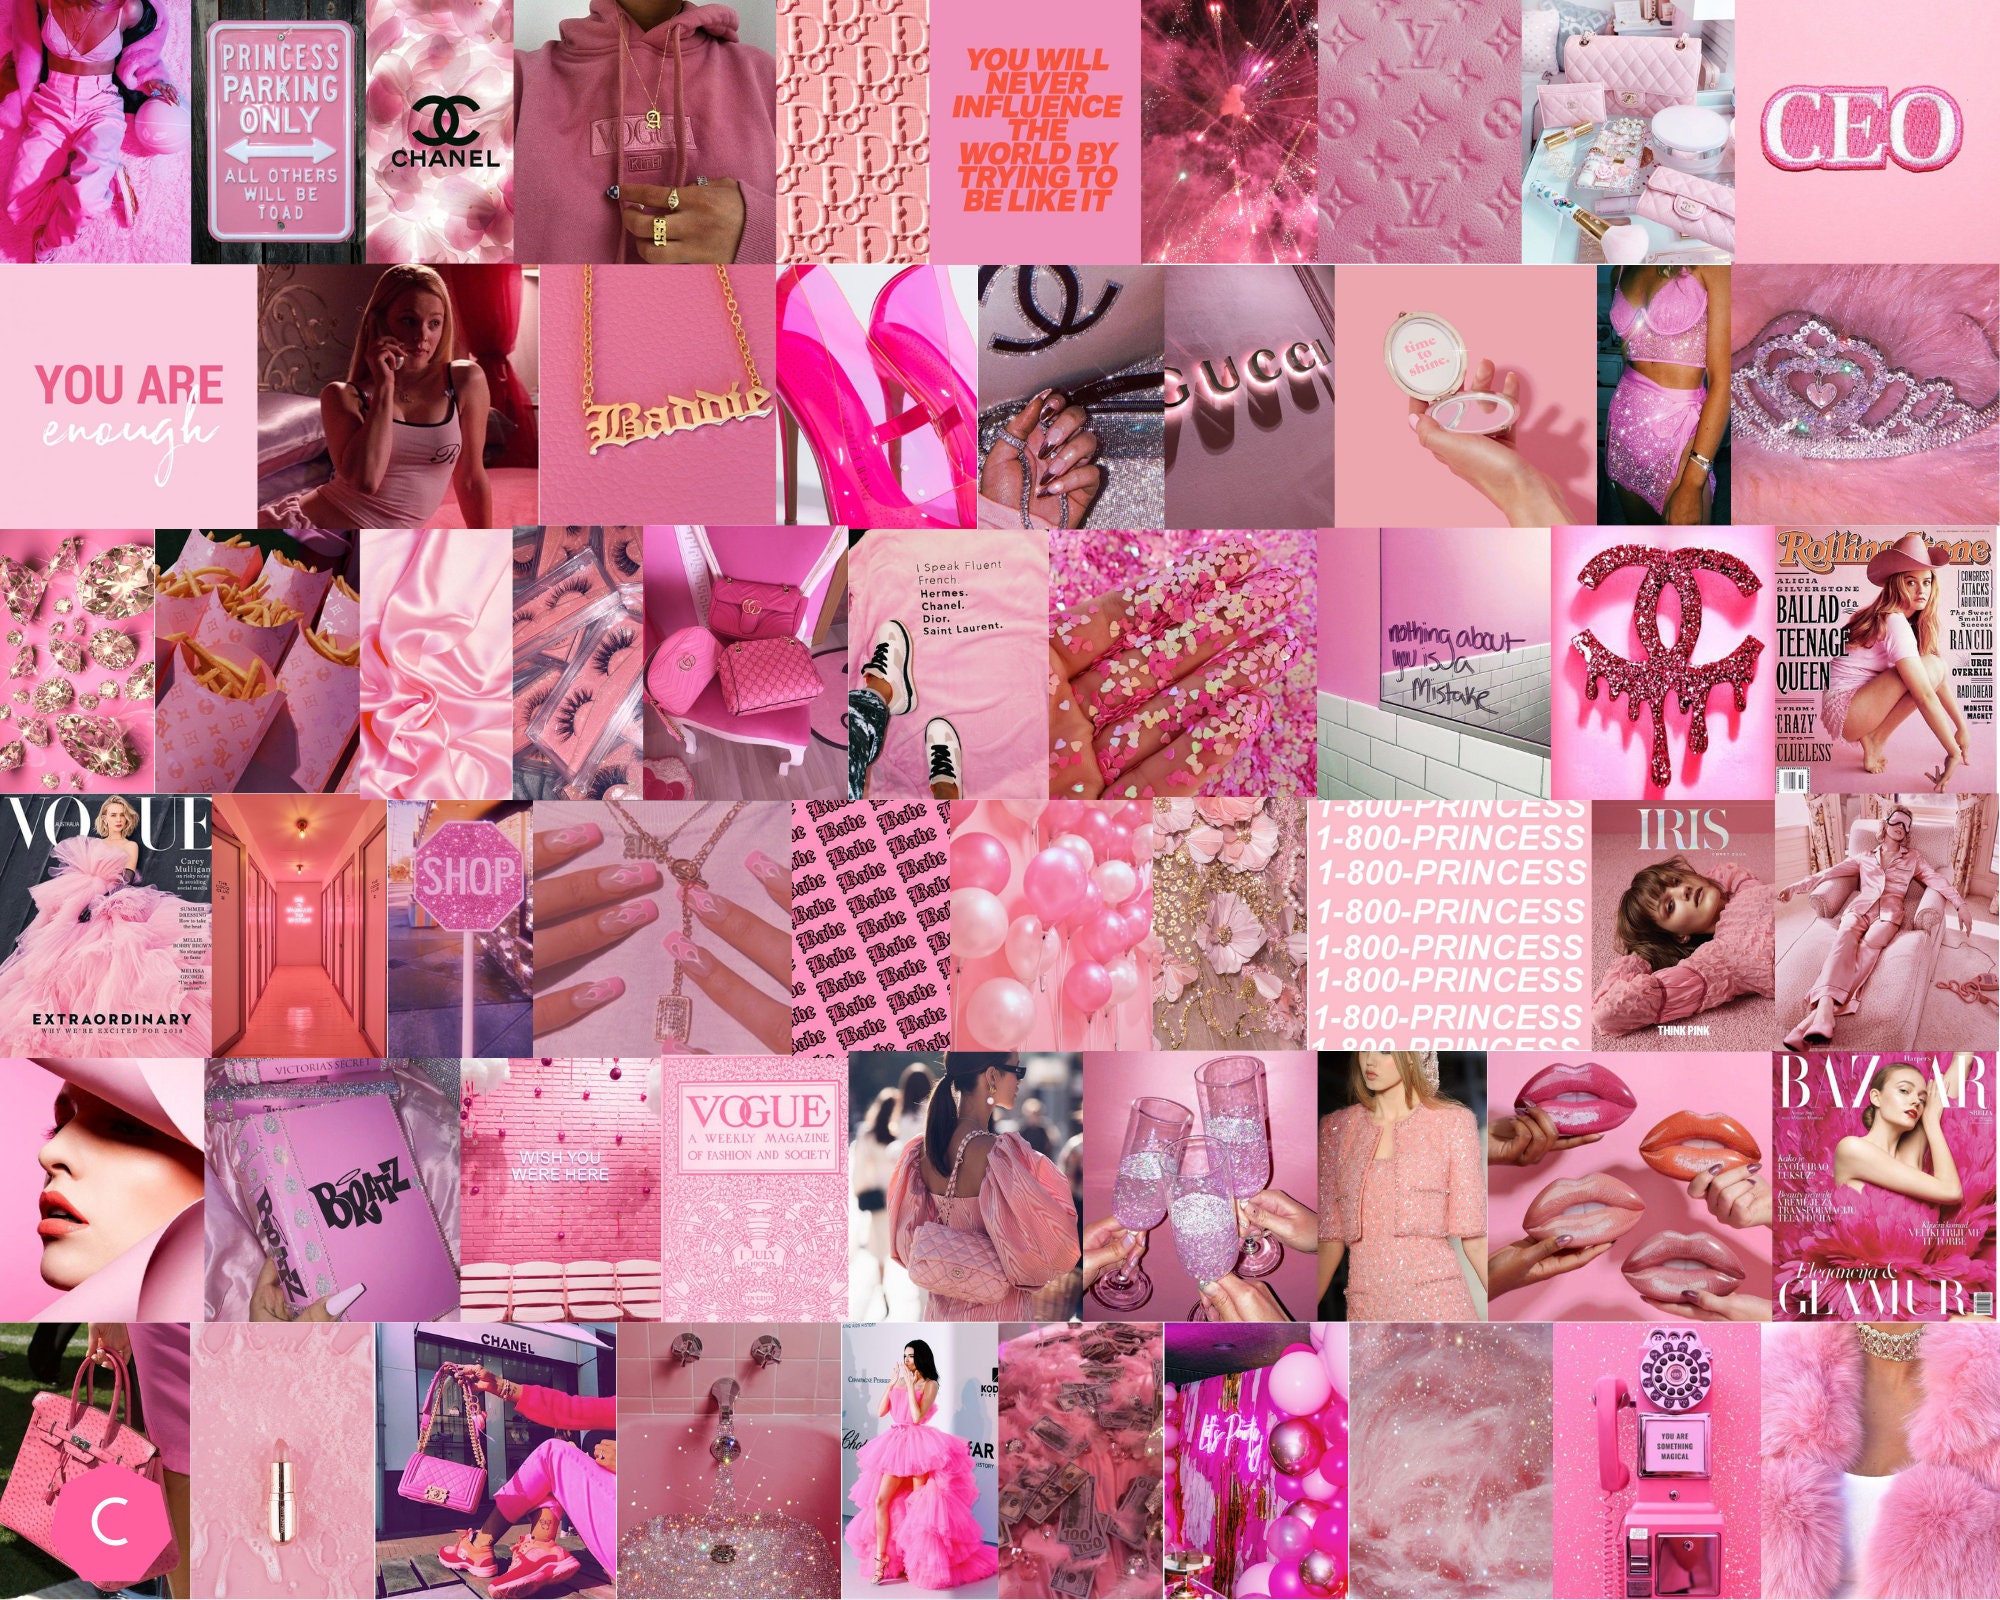 120 Pink bougie aesthetic pictures ideas  picture collage wall, photo wall  collage, pastel pink aesthetic